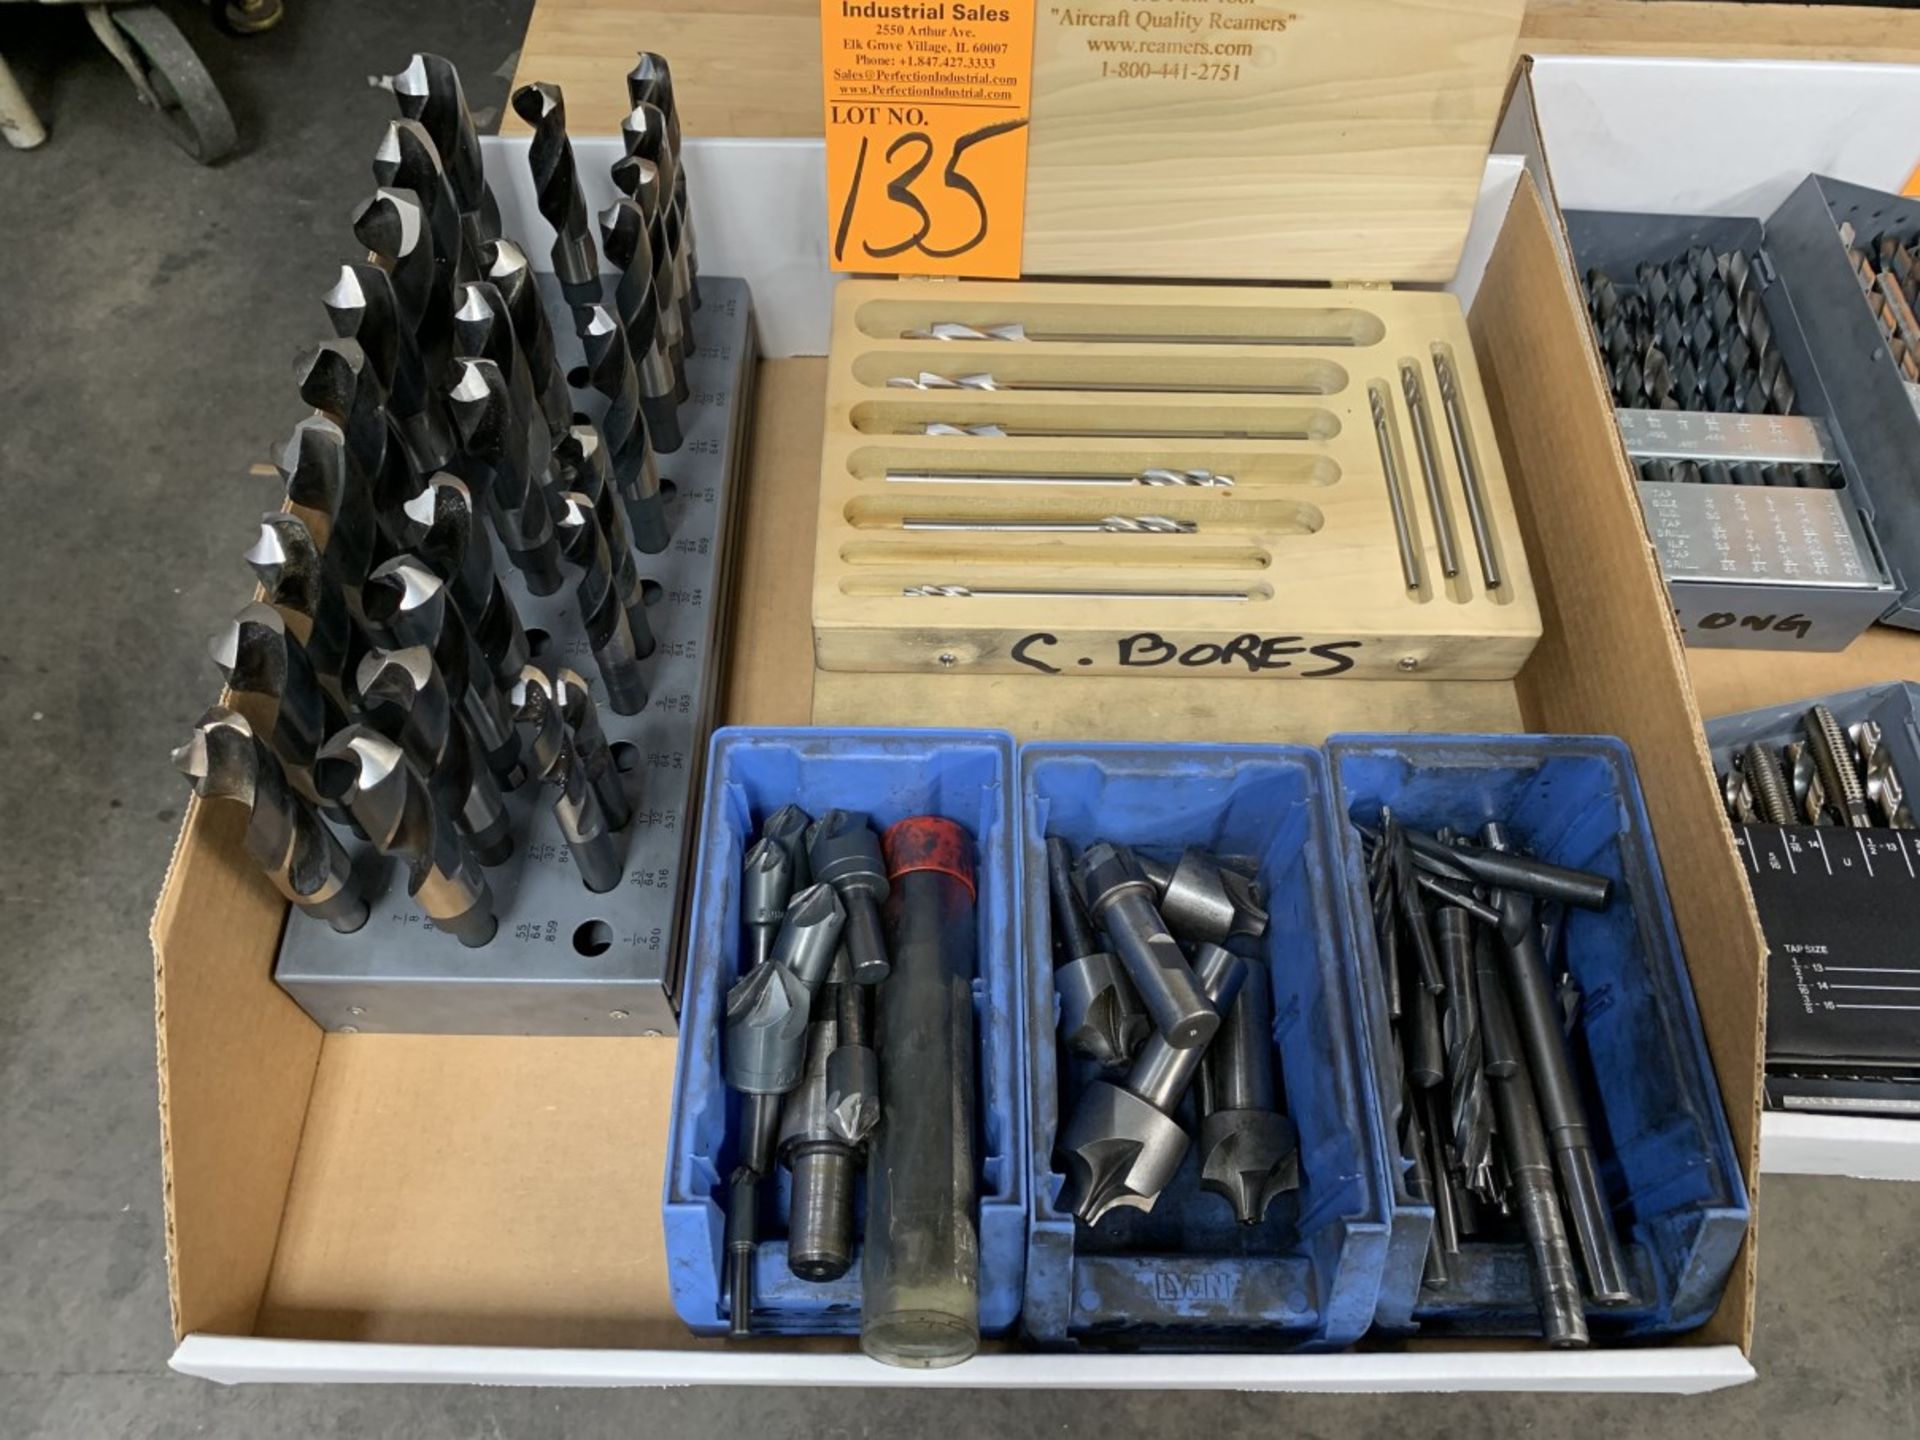 Lot of Assorted Drills, Counter Bores and Counters Sinks (Located at: R & D Components)